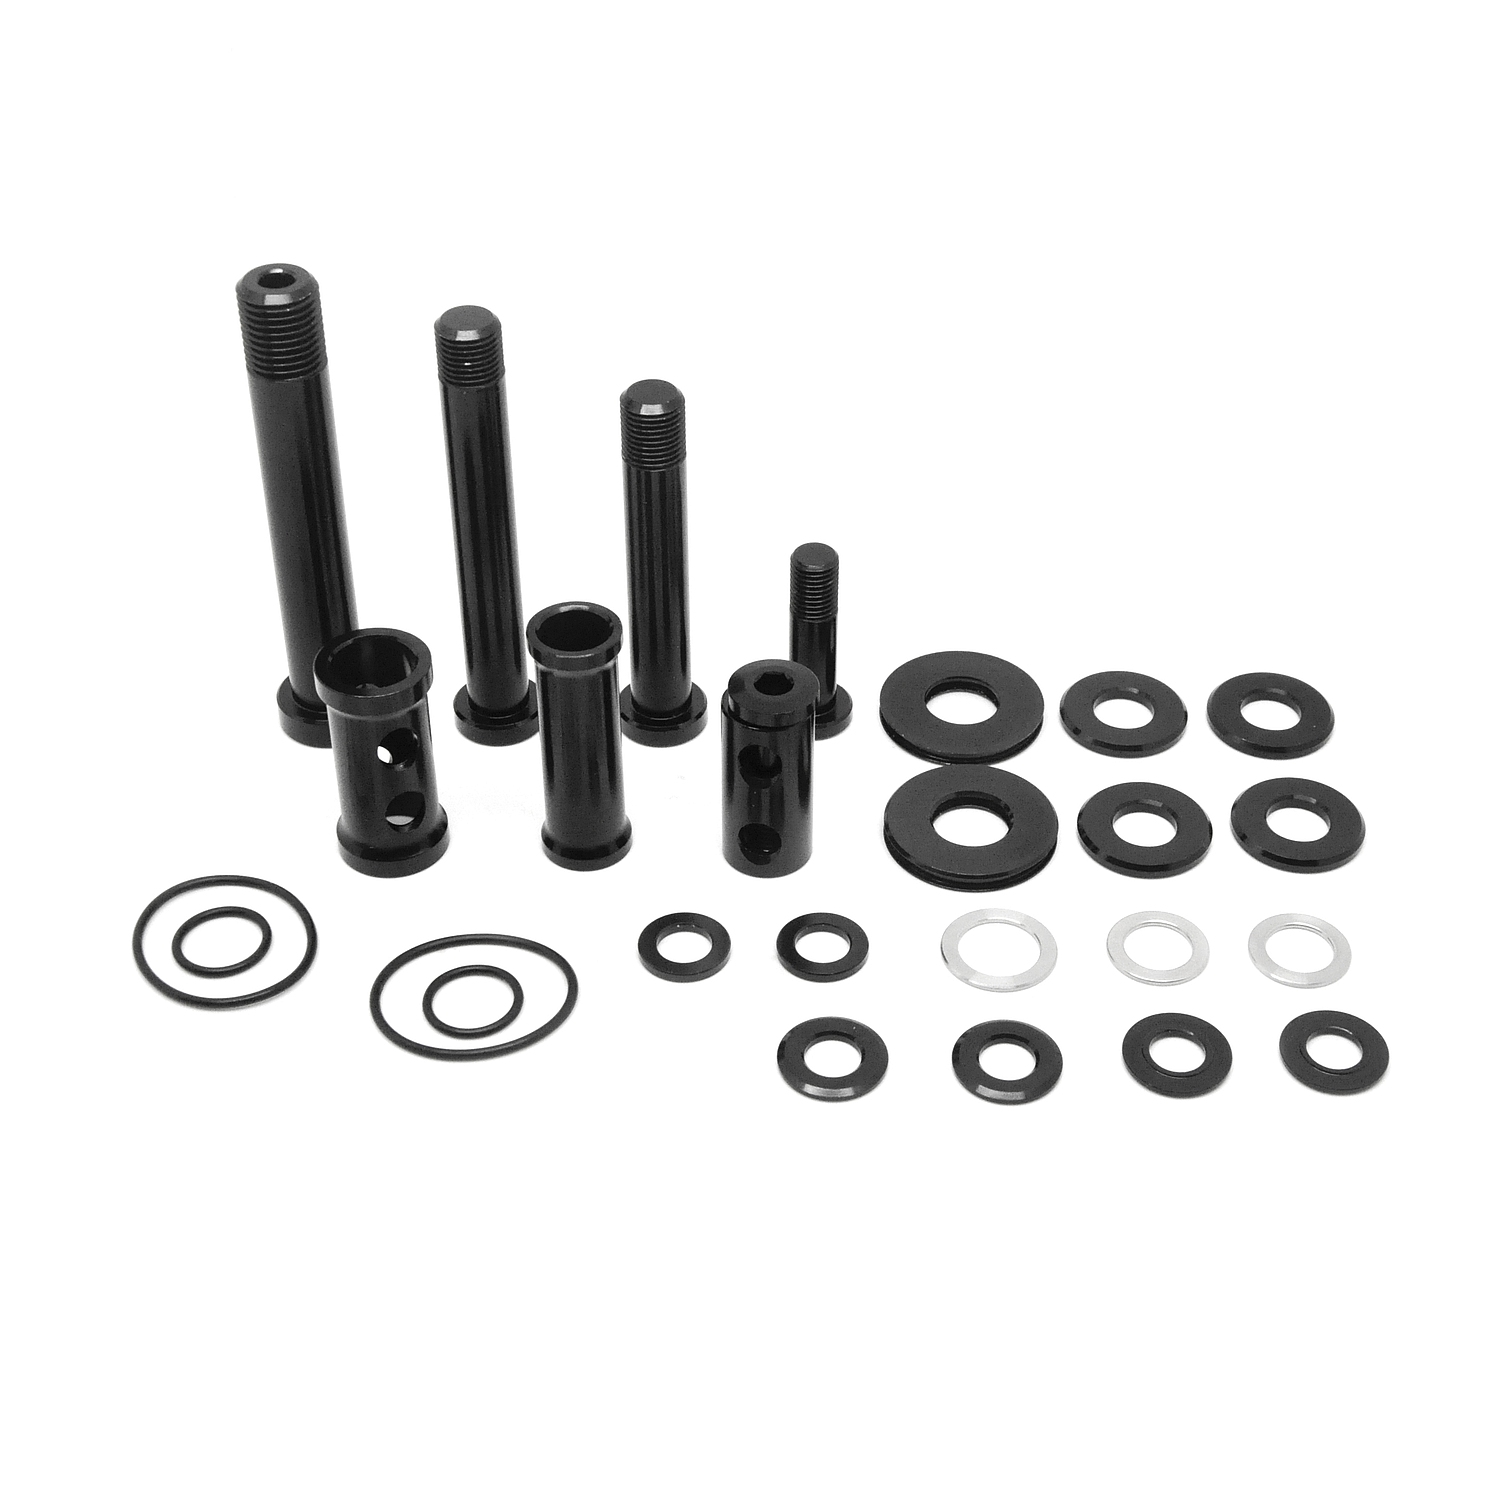 Picture of Rocky Mountain Pivot Bolt Kit for Powerplay Models 2022+ - #1812036